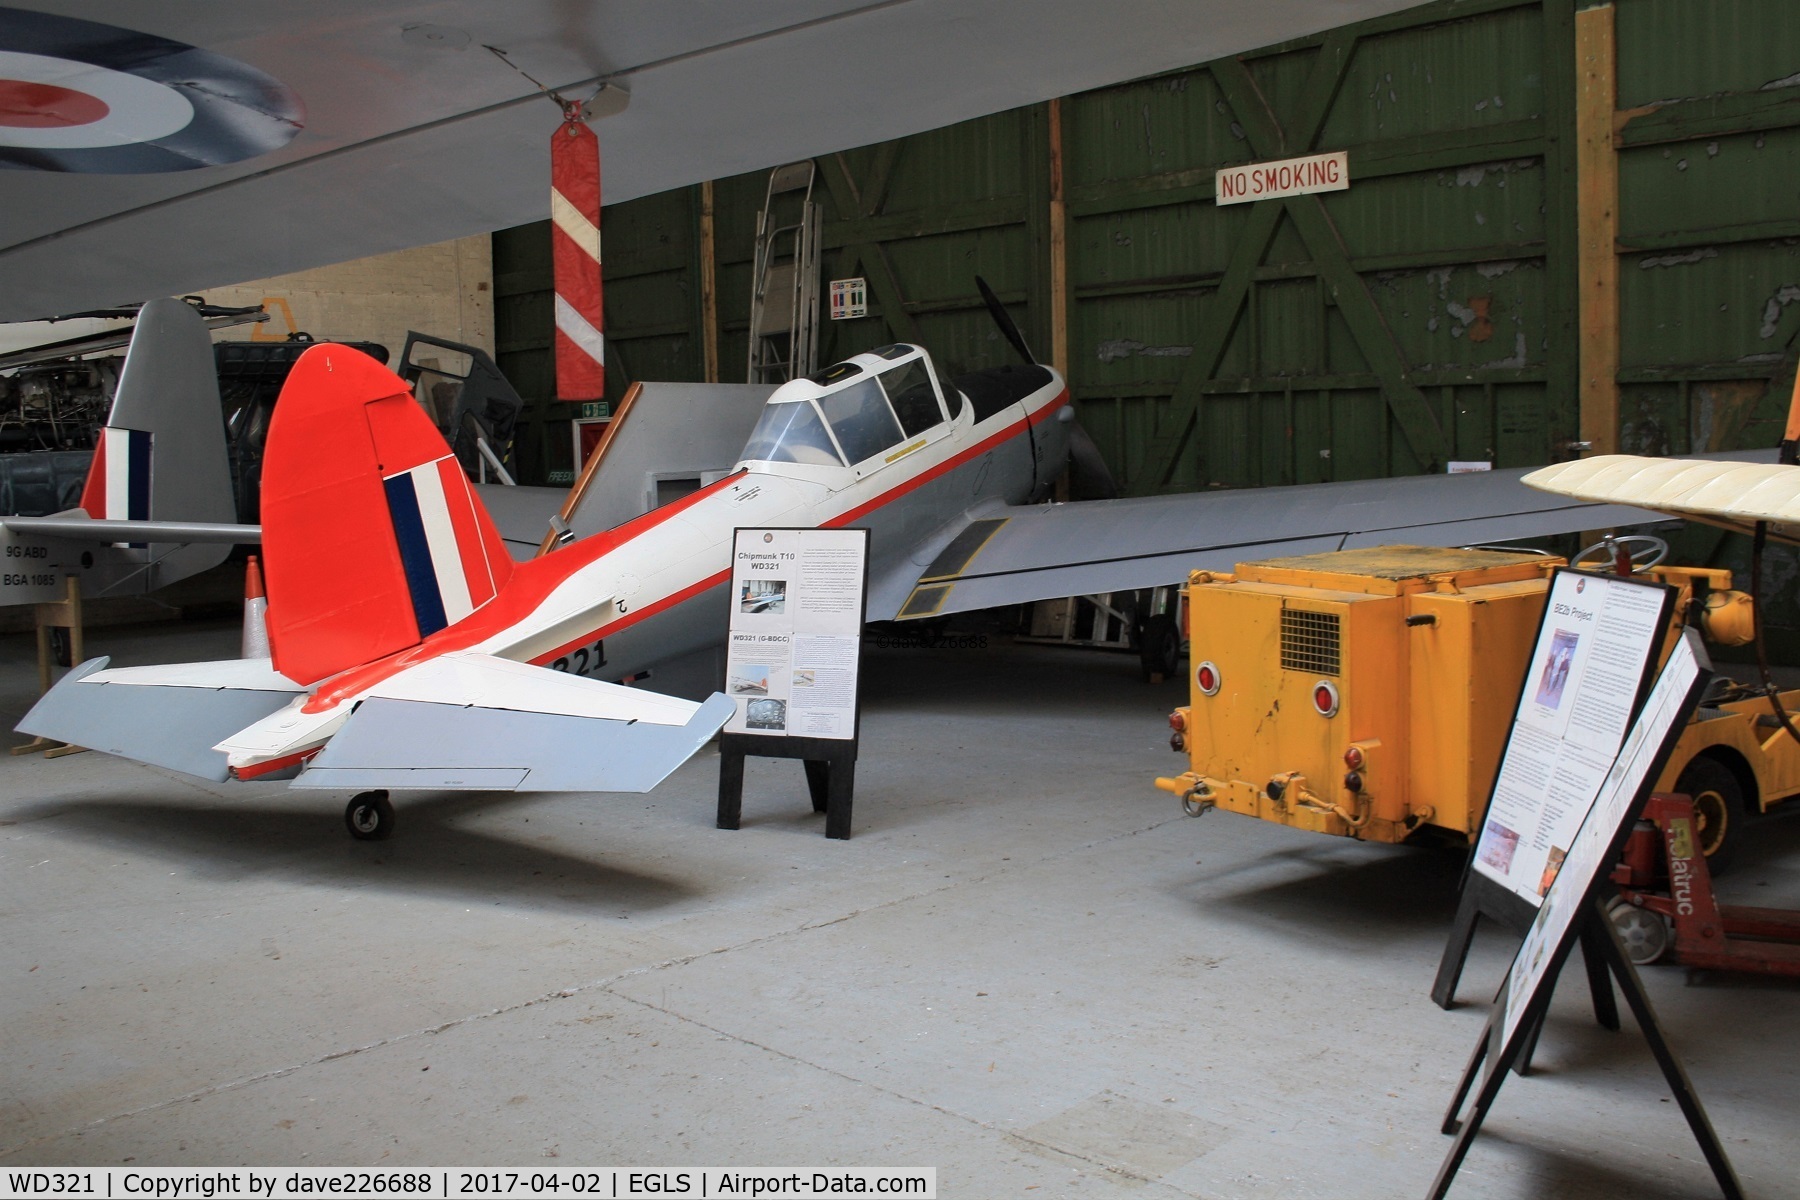 WD321, 1955 De Havilland DHC-1 Chipmunk 22 (Lycoming) C/N C1/0258, WD321 in the museum hanger at Old Sarum